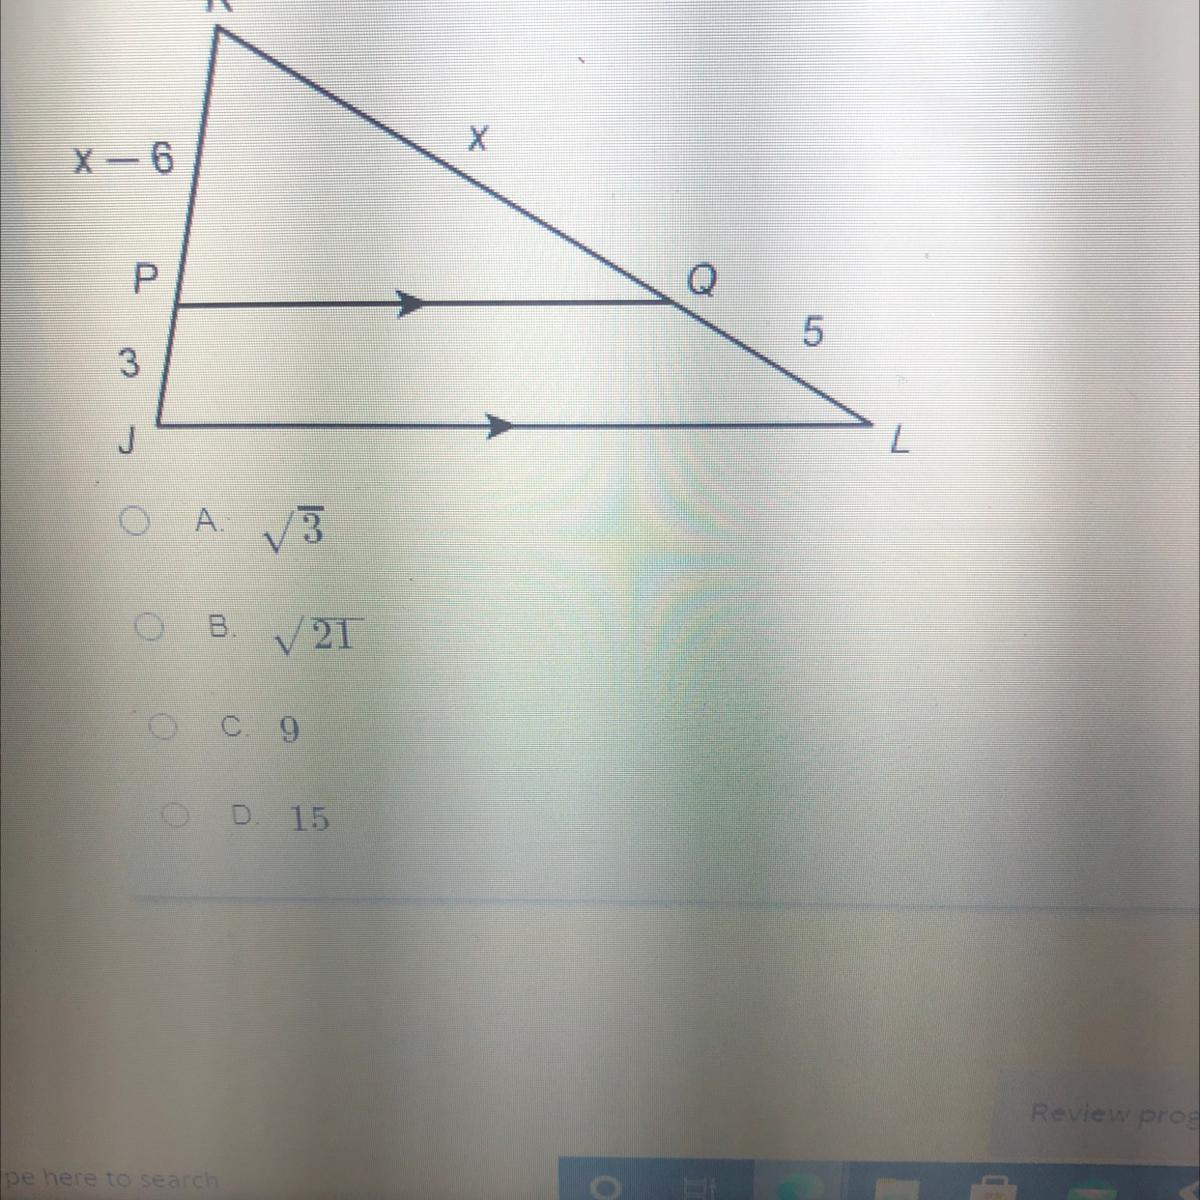 What Is The Value Of X?KX-6QP5)LJ